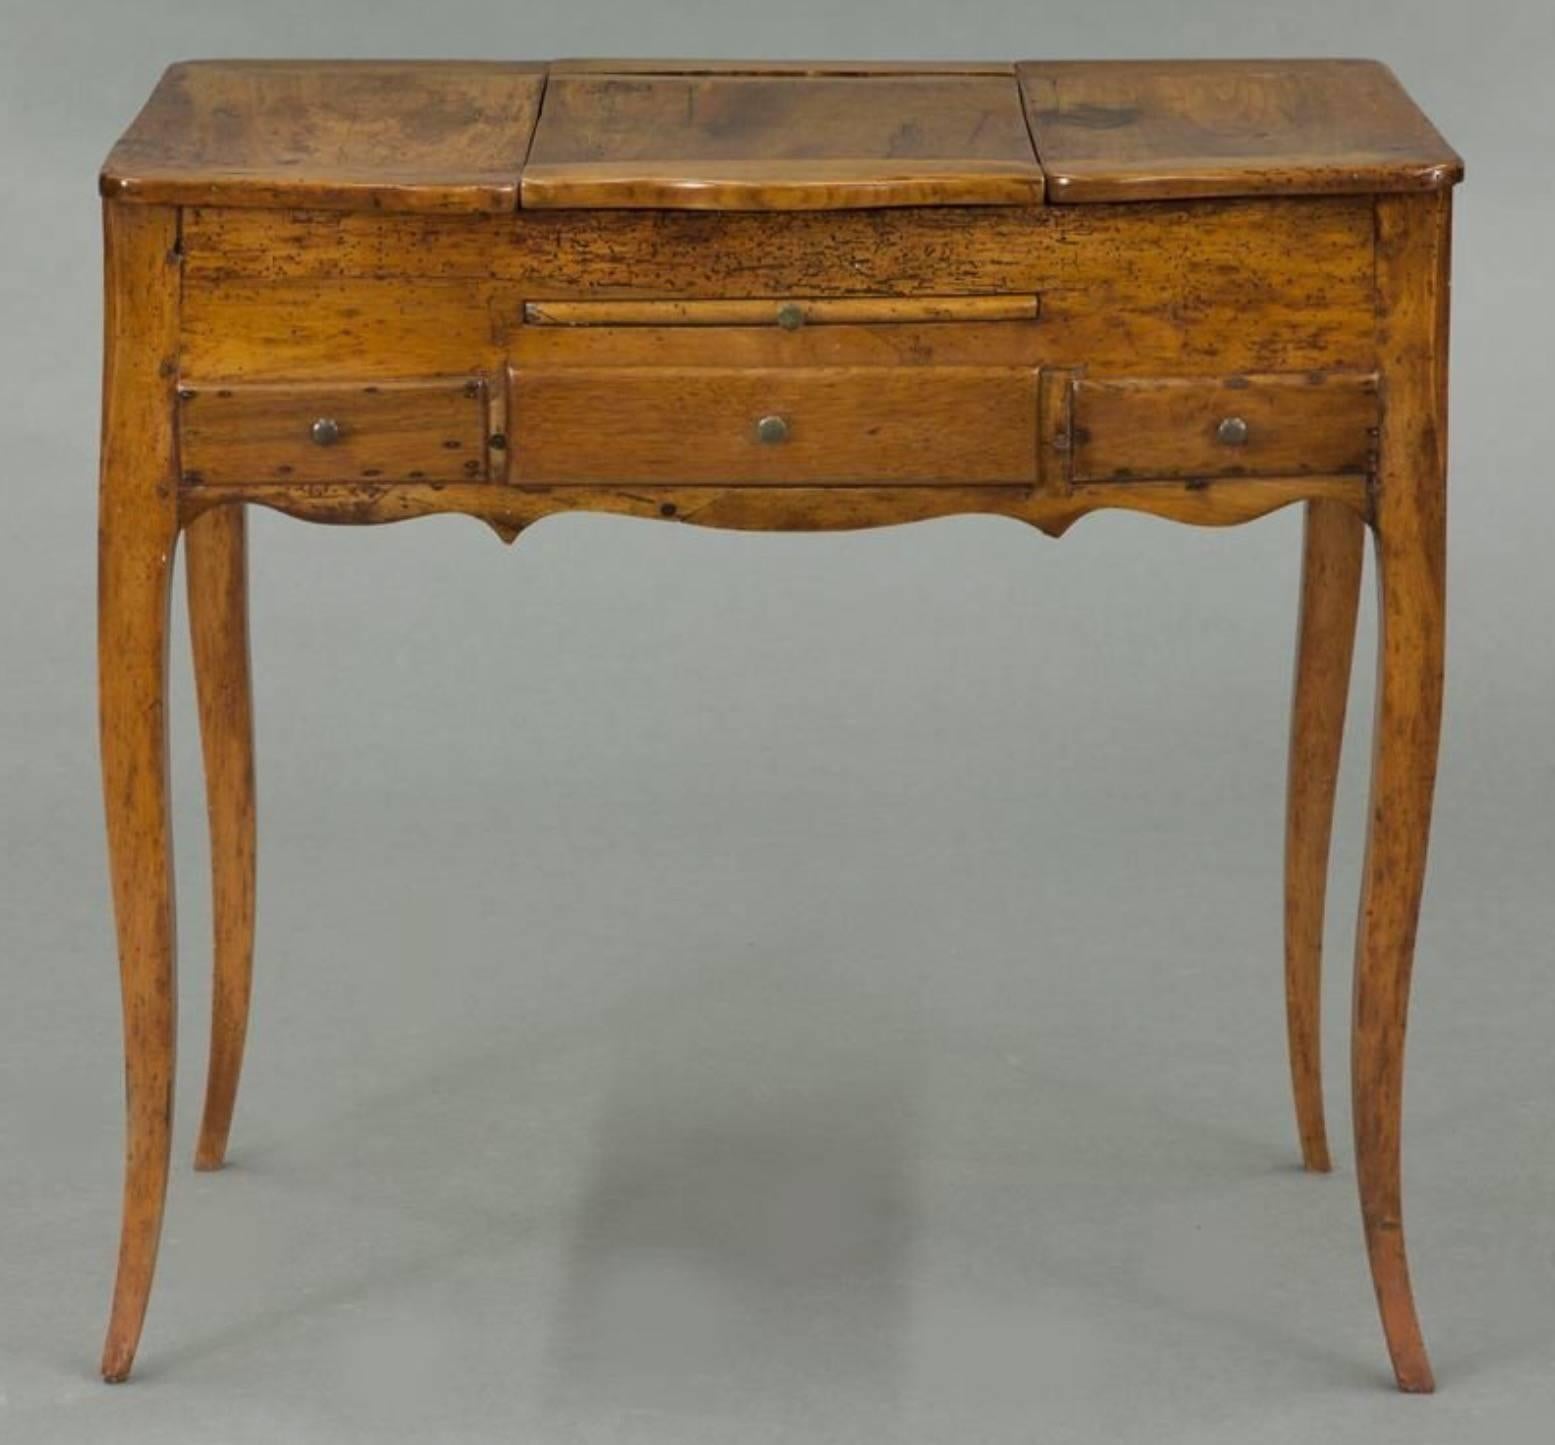 Country French, 18th Century Fruitwood Ladies Dressing Bedroom Table